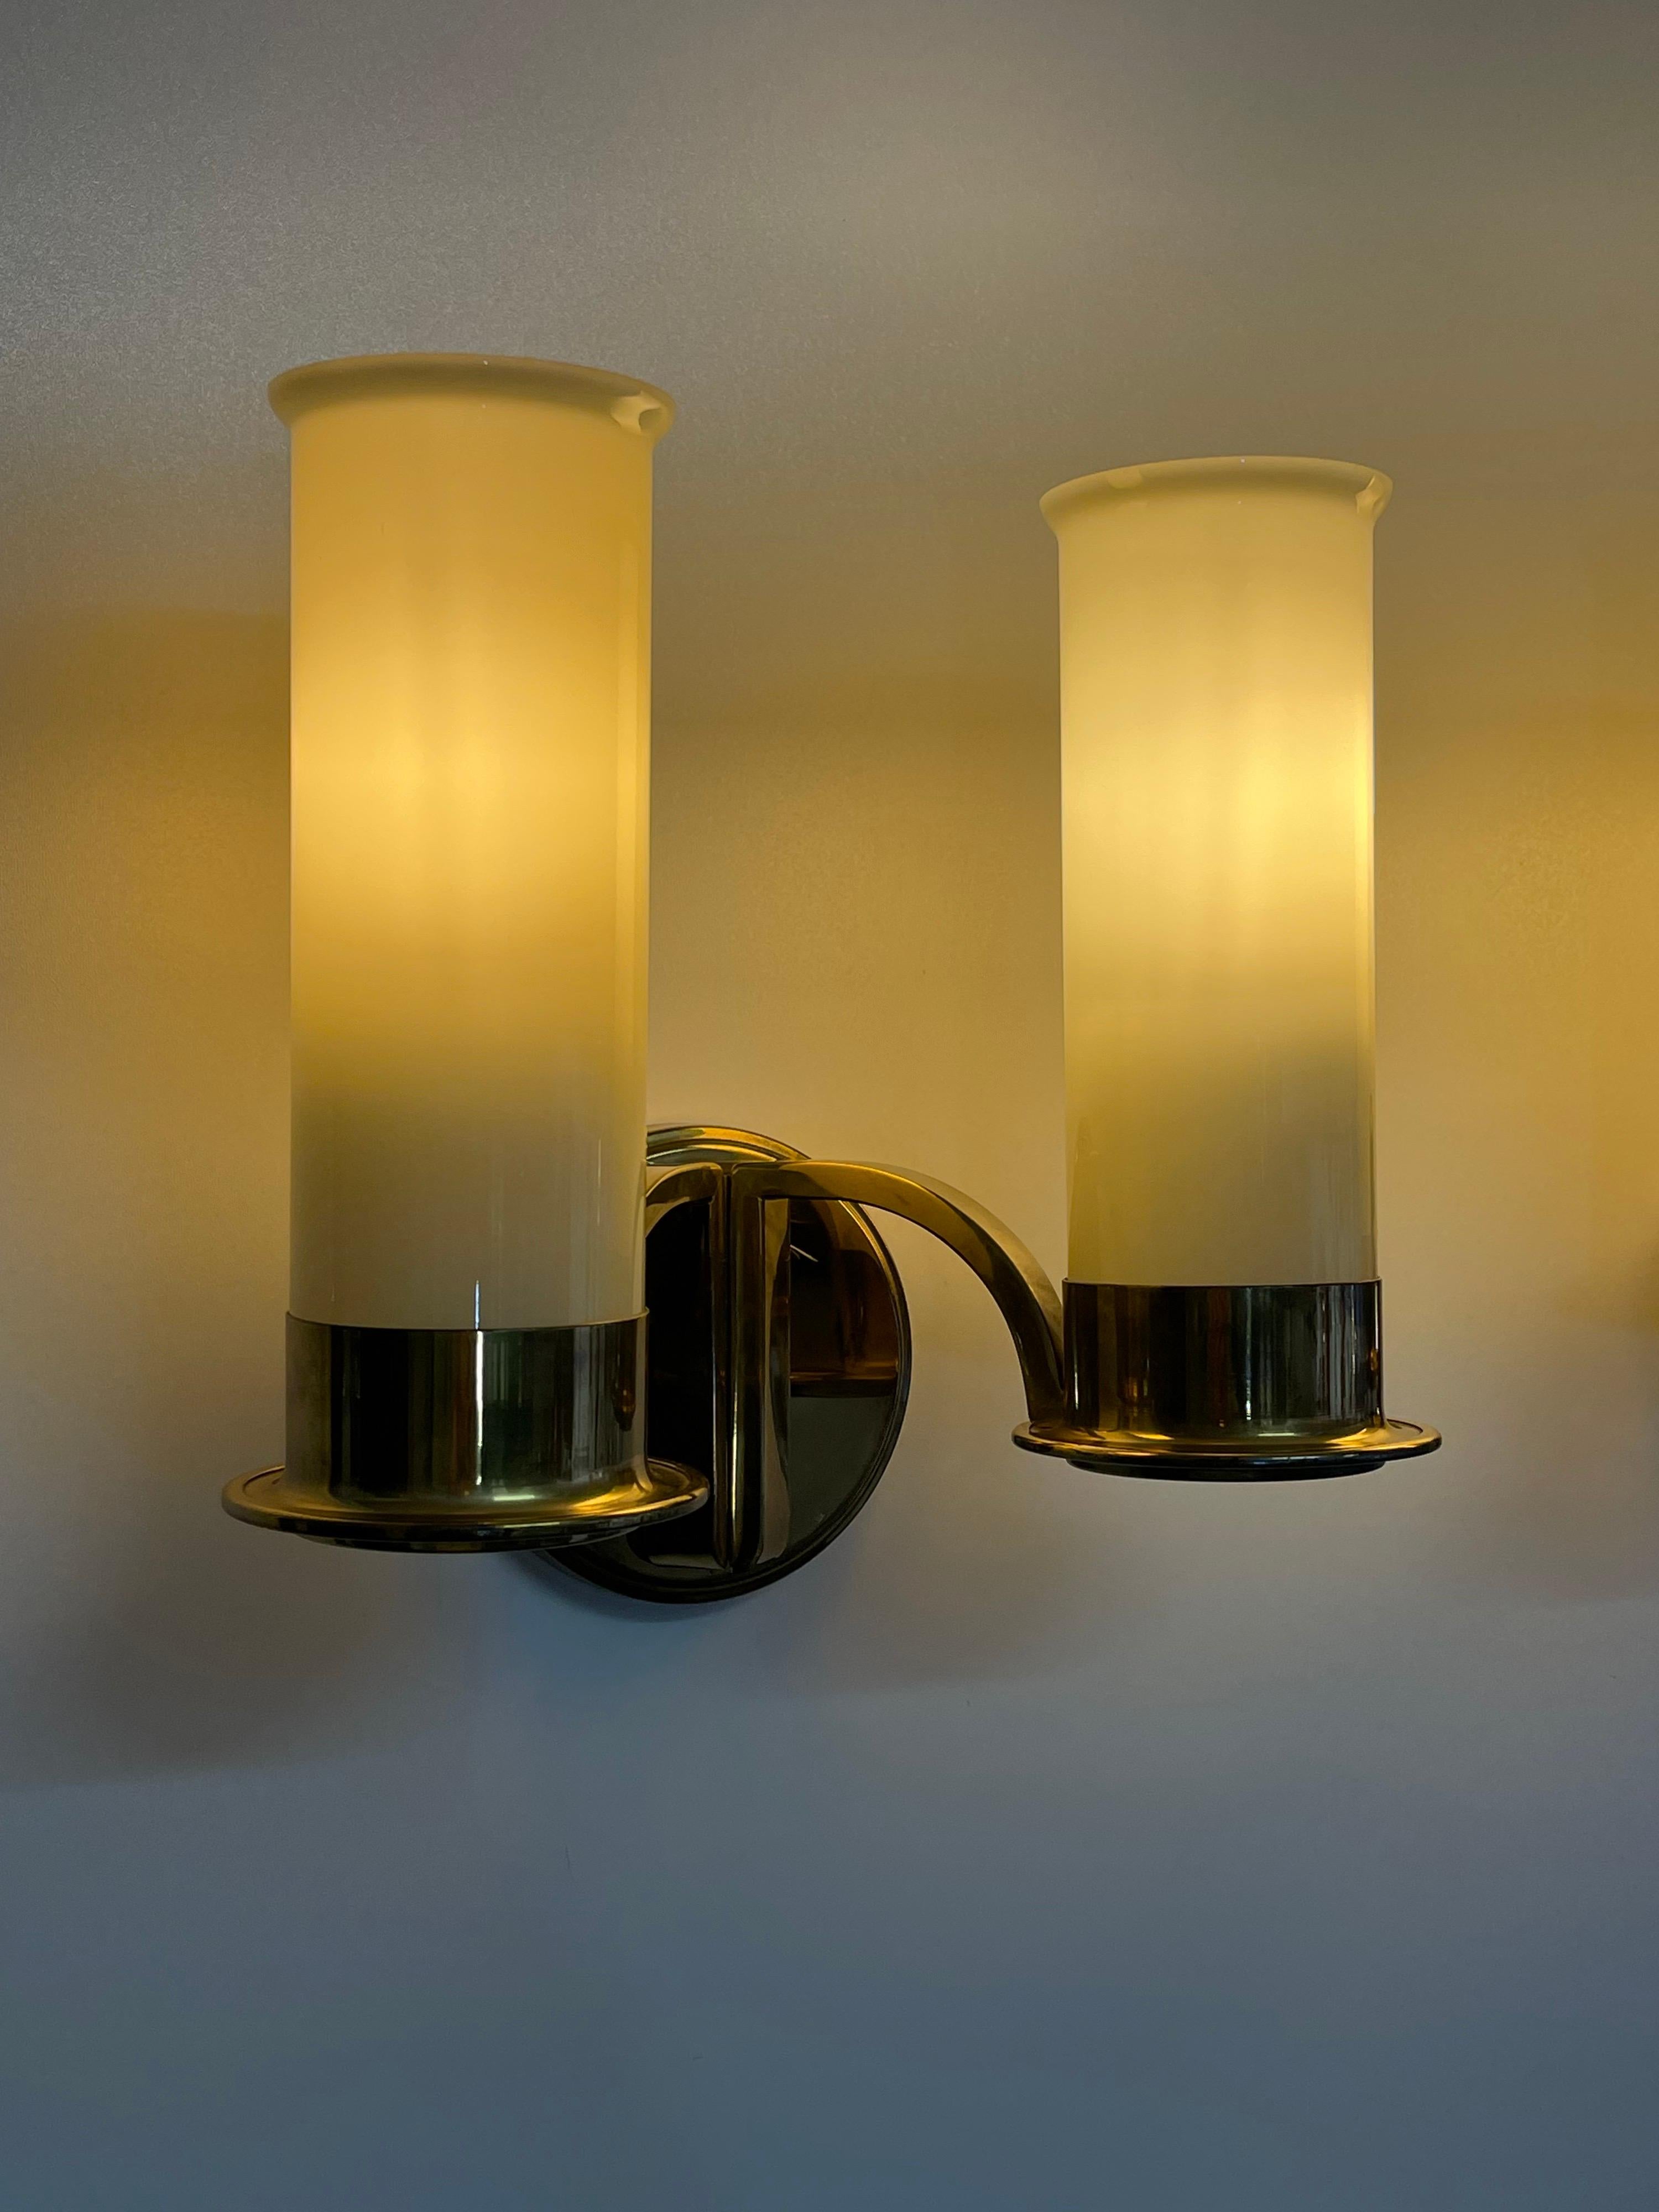 Set of Four Large Brass and Opal Glass Wall Sconces, circa 1930s For Sale 2